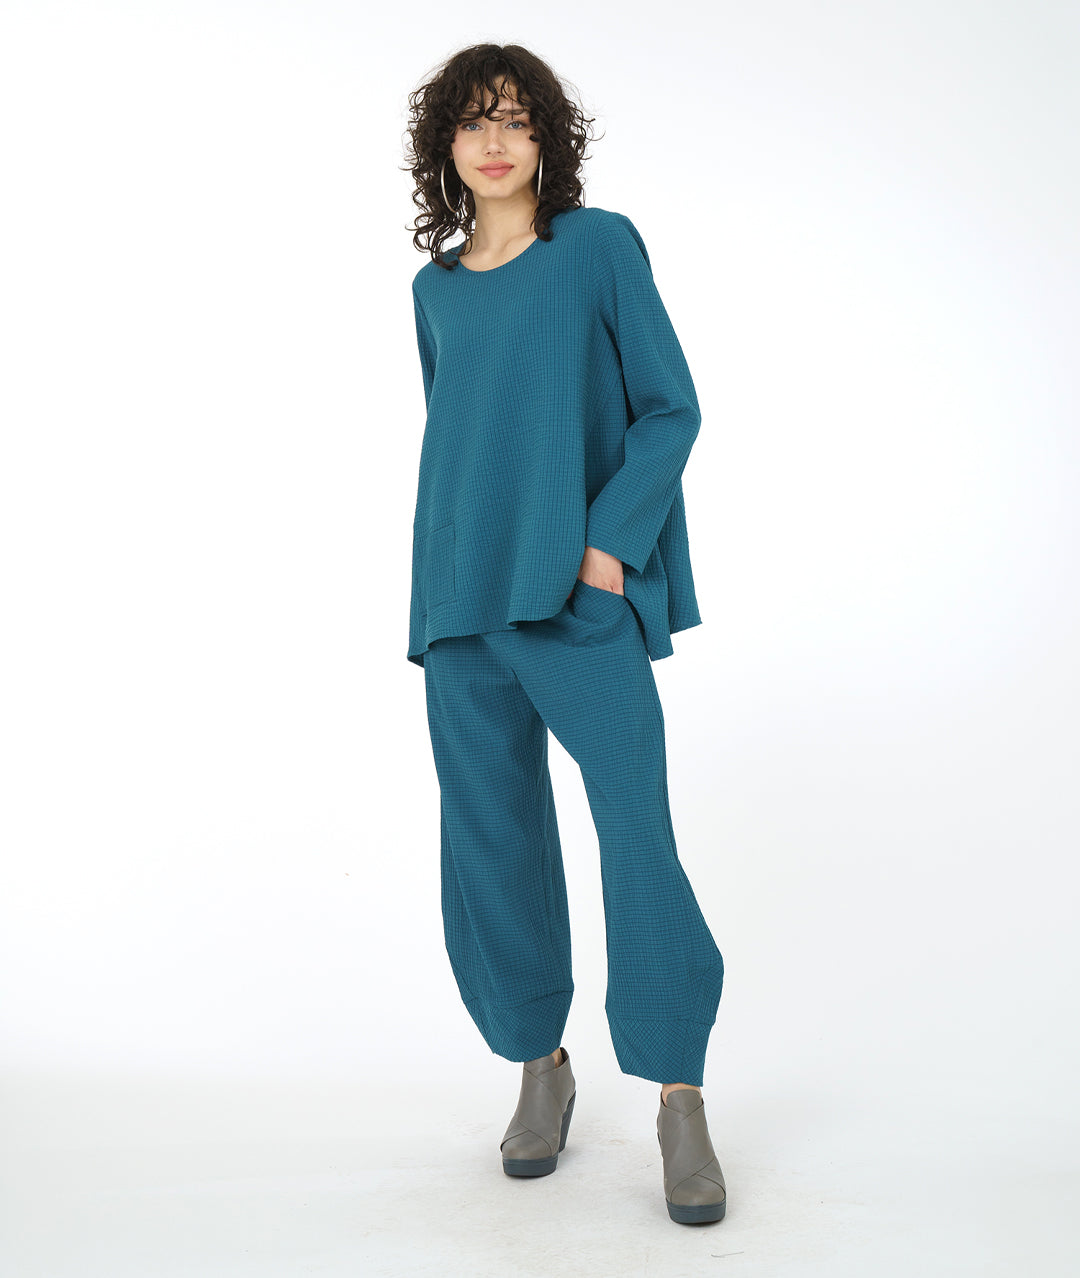 model in a teal full bodied pull over with a single square pocket at the hip, in a matching wide leg pant 